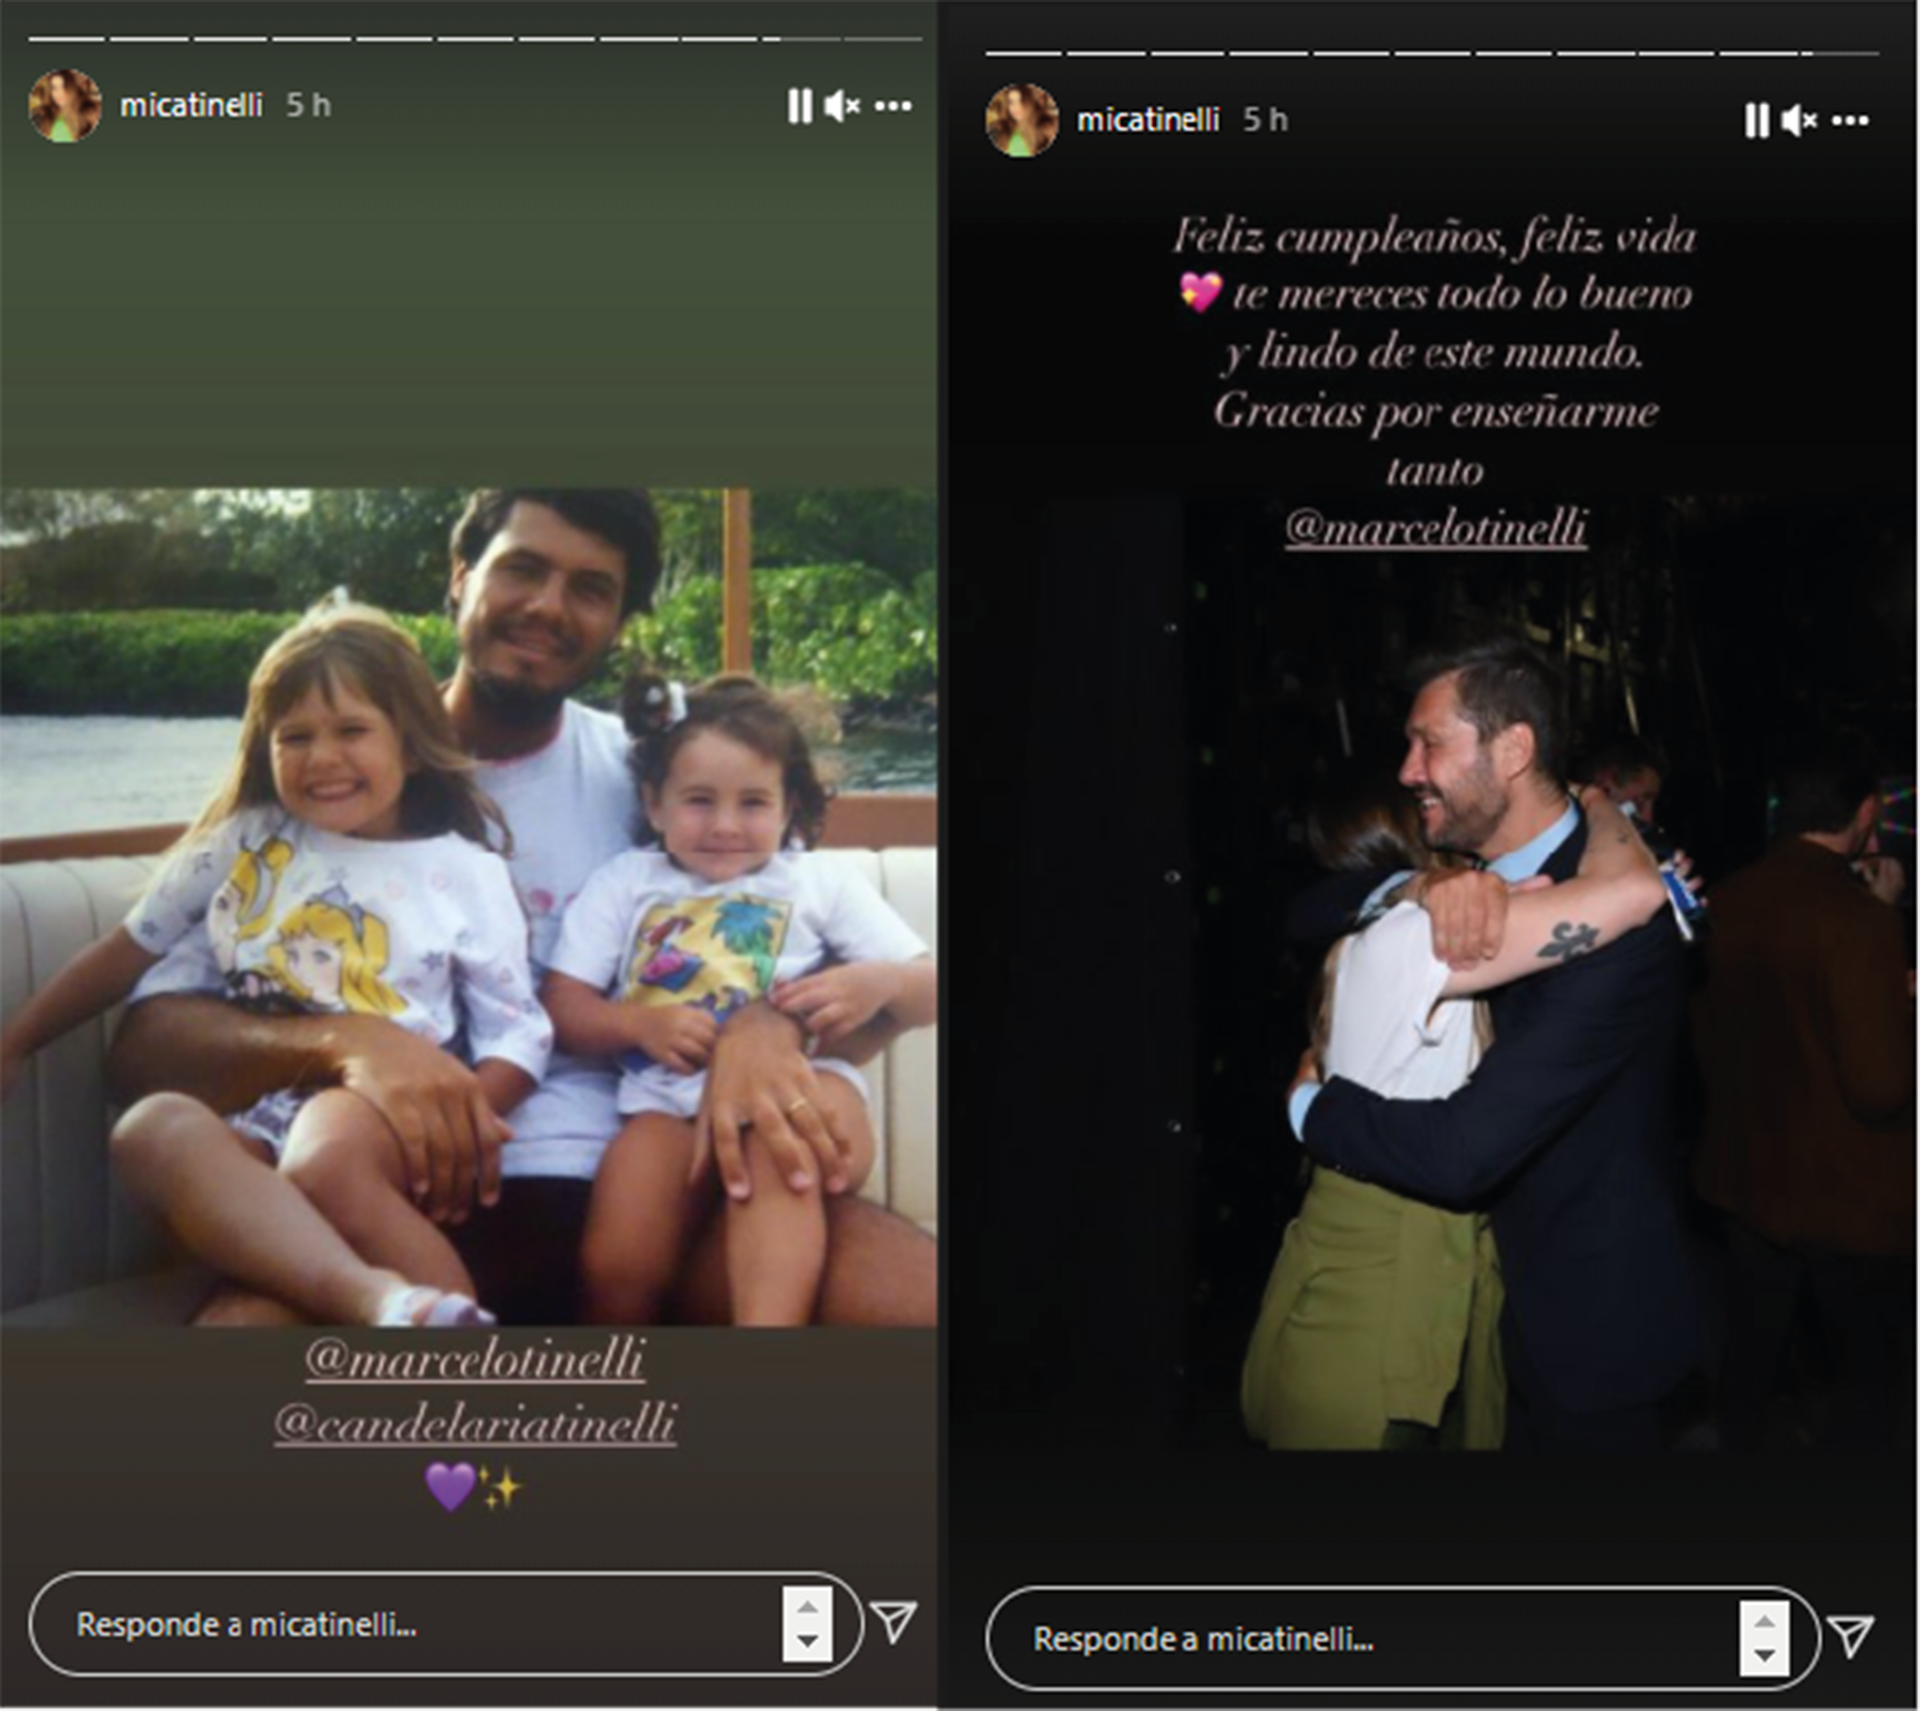 Mica Tinelli congratulated him from Mexico with another heartfelt message